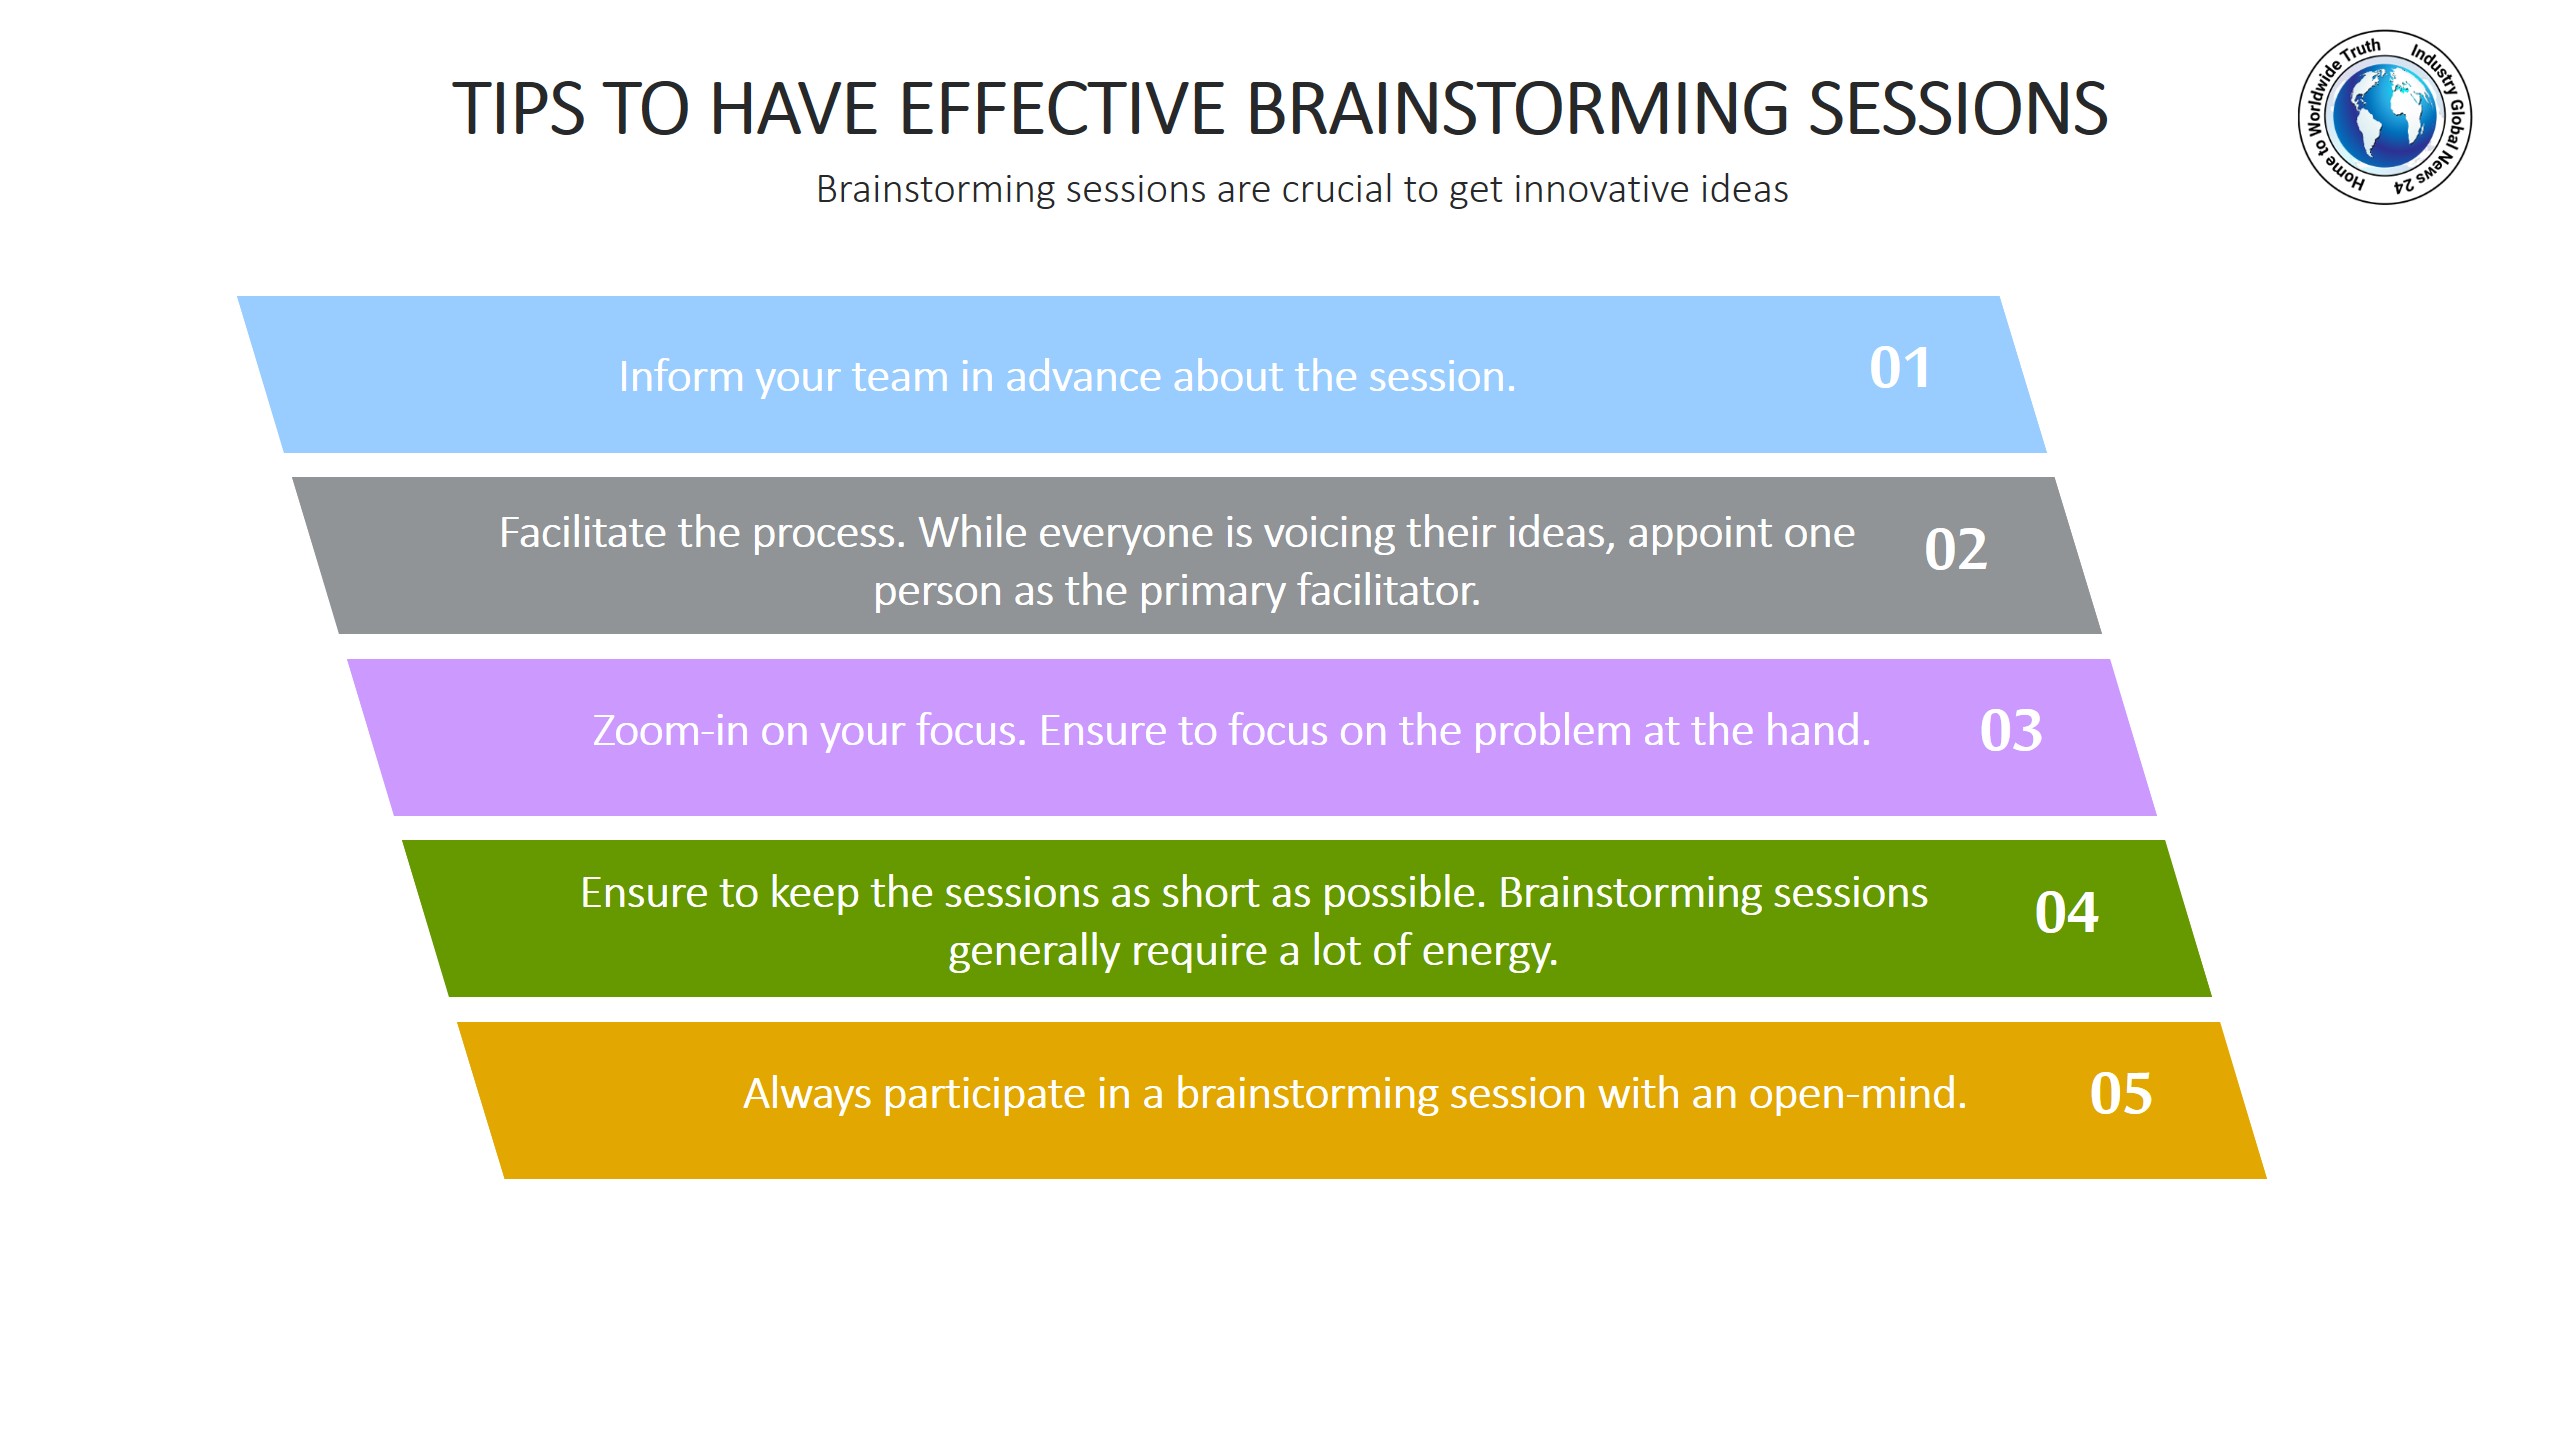 Tips to have effective brainstorming sessions